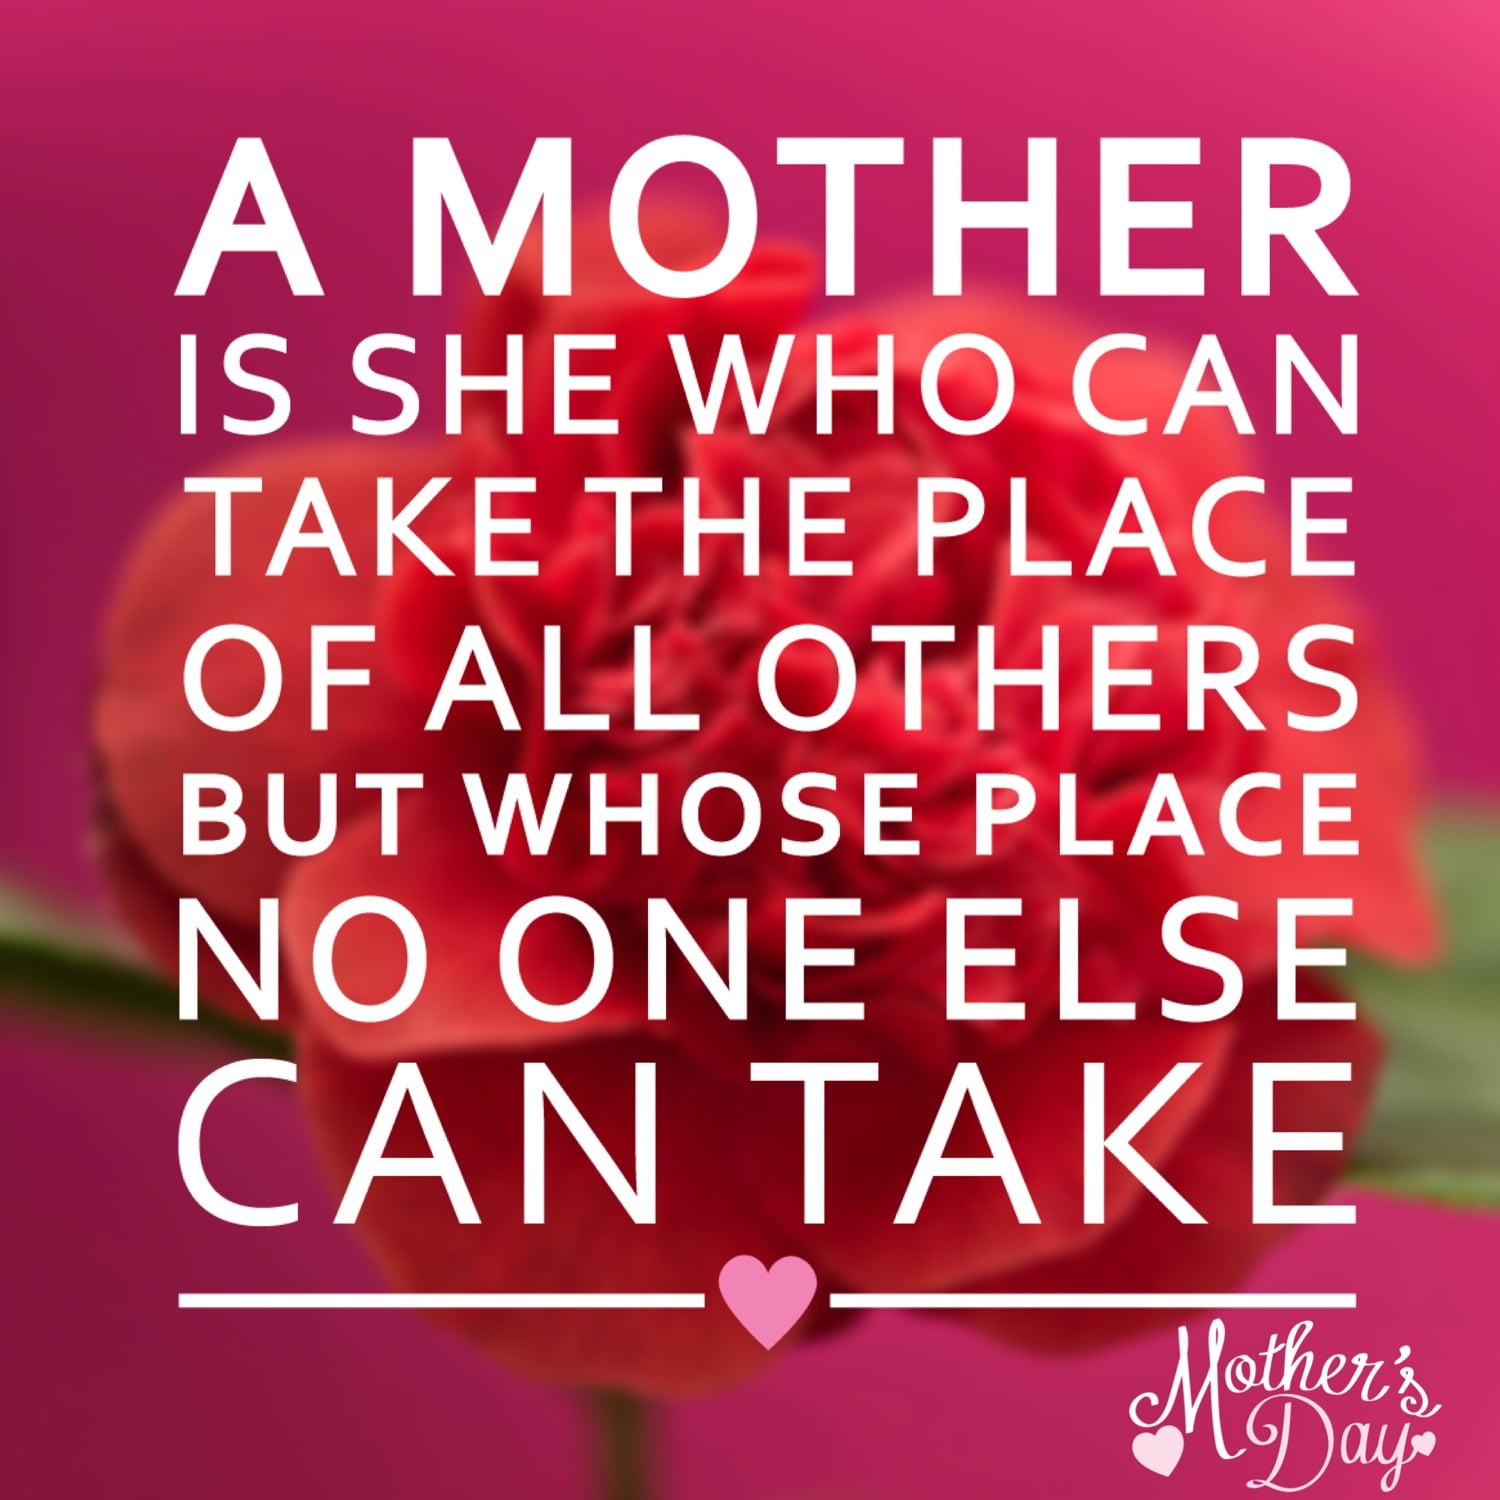 Mothers Day Pictures Free Download - Mother's Day 2018 Quotes - HD Wallpaper 